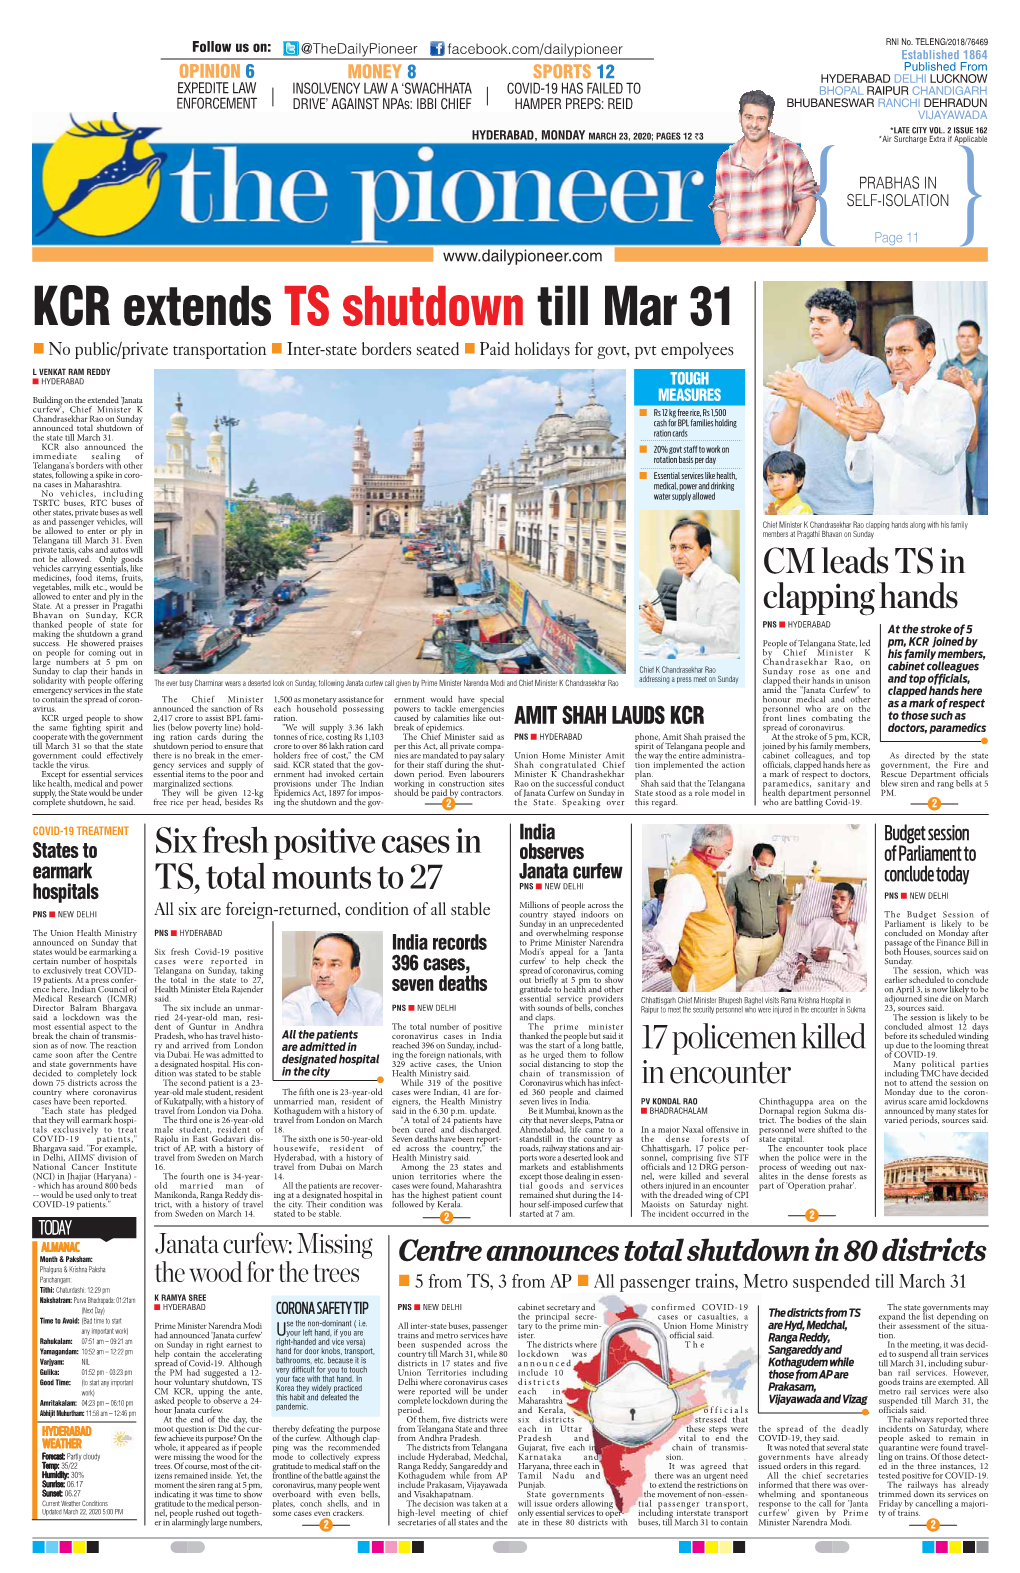 KCR Extends TS Shutdown Till Mar 31 „ No Public/Private Transportation „ Inter-State Borders Seated „ Paid Holidays for Govt, Pvt Empolyees